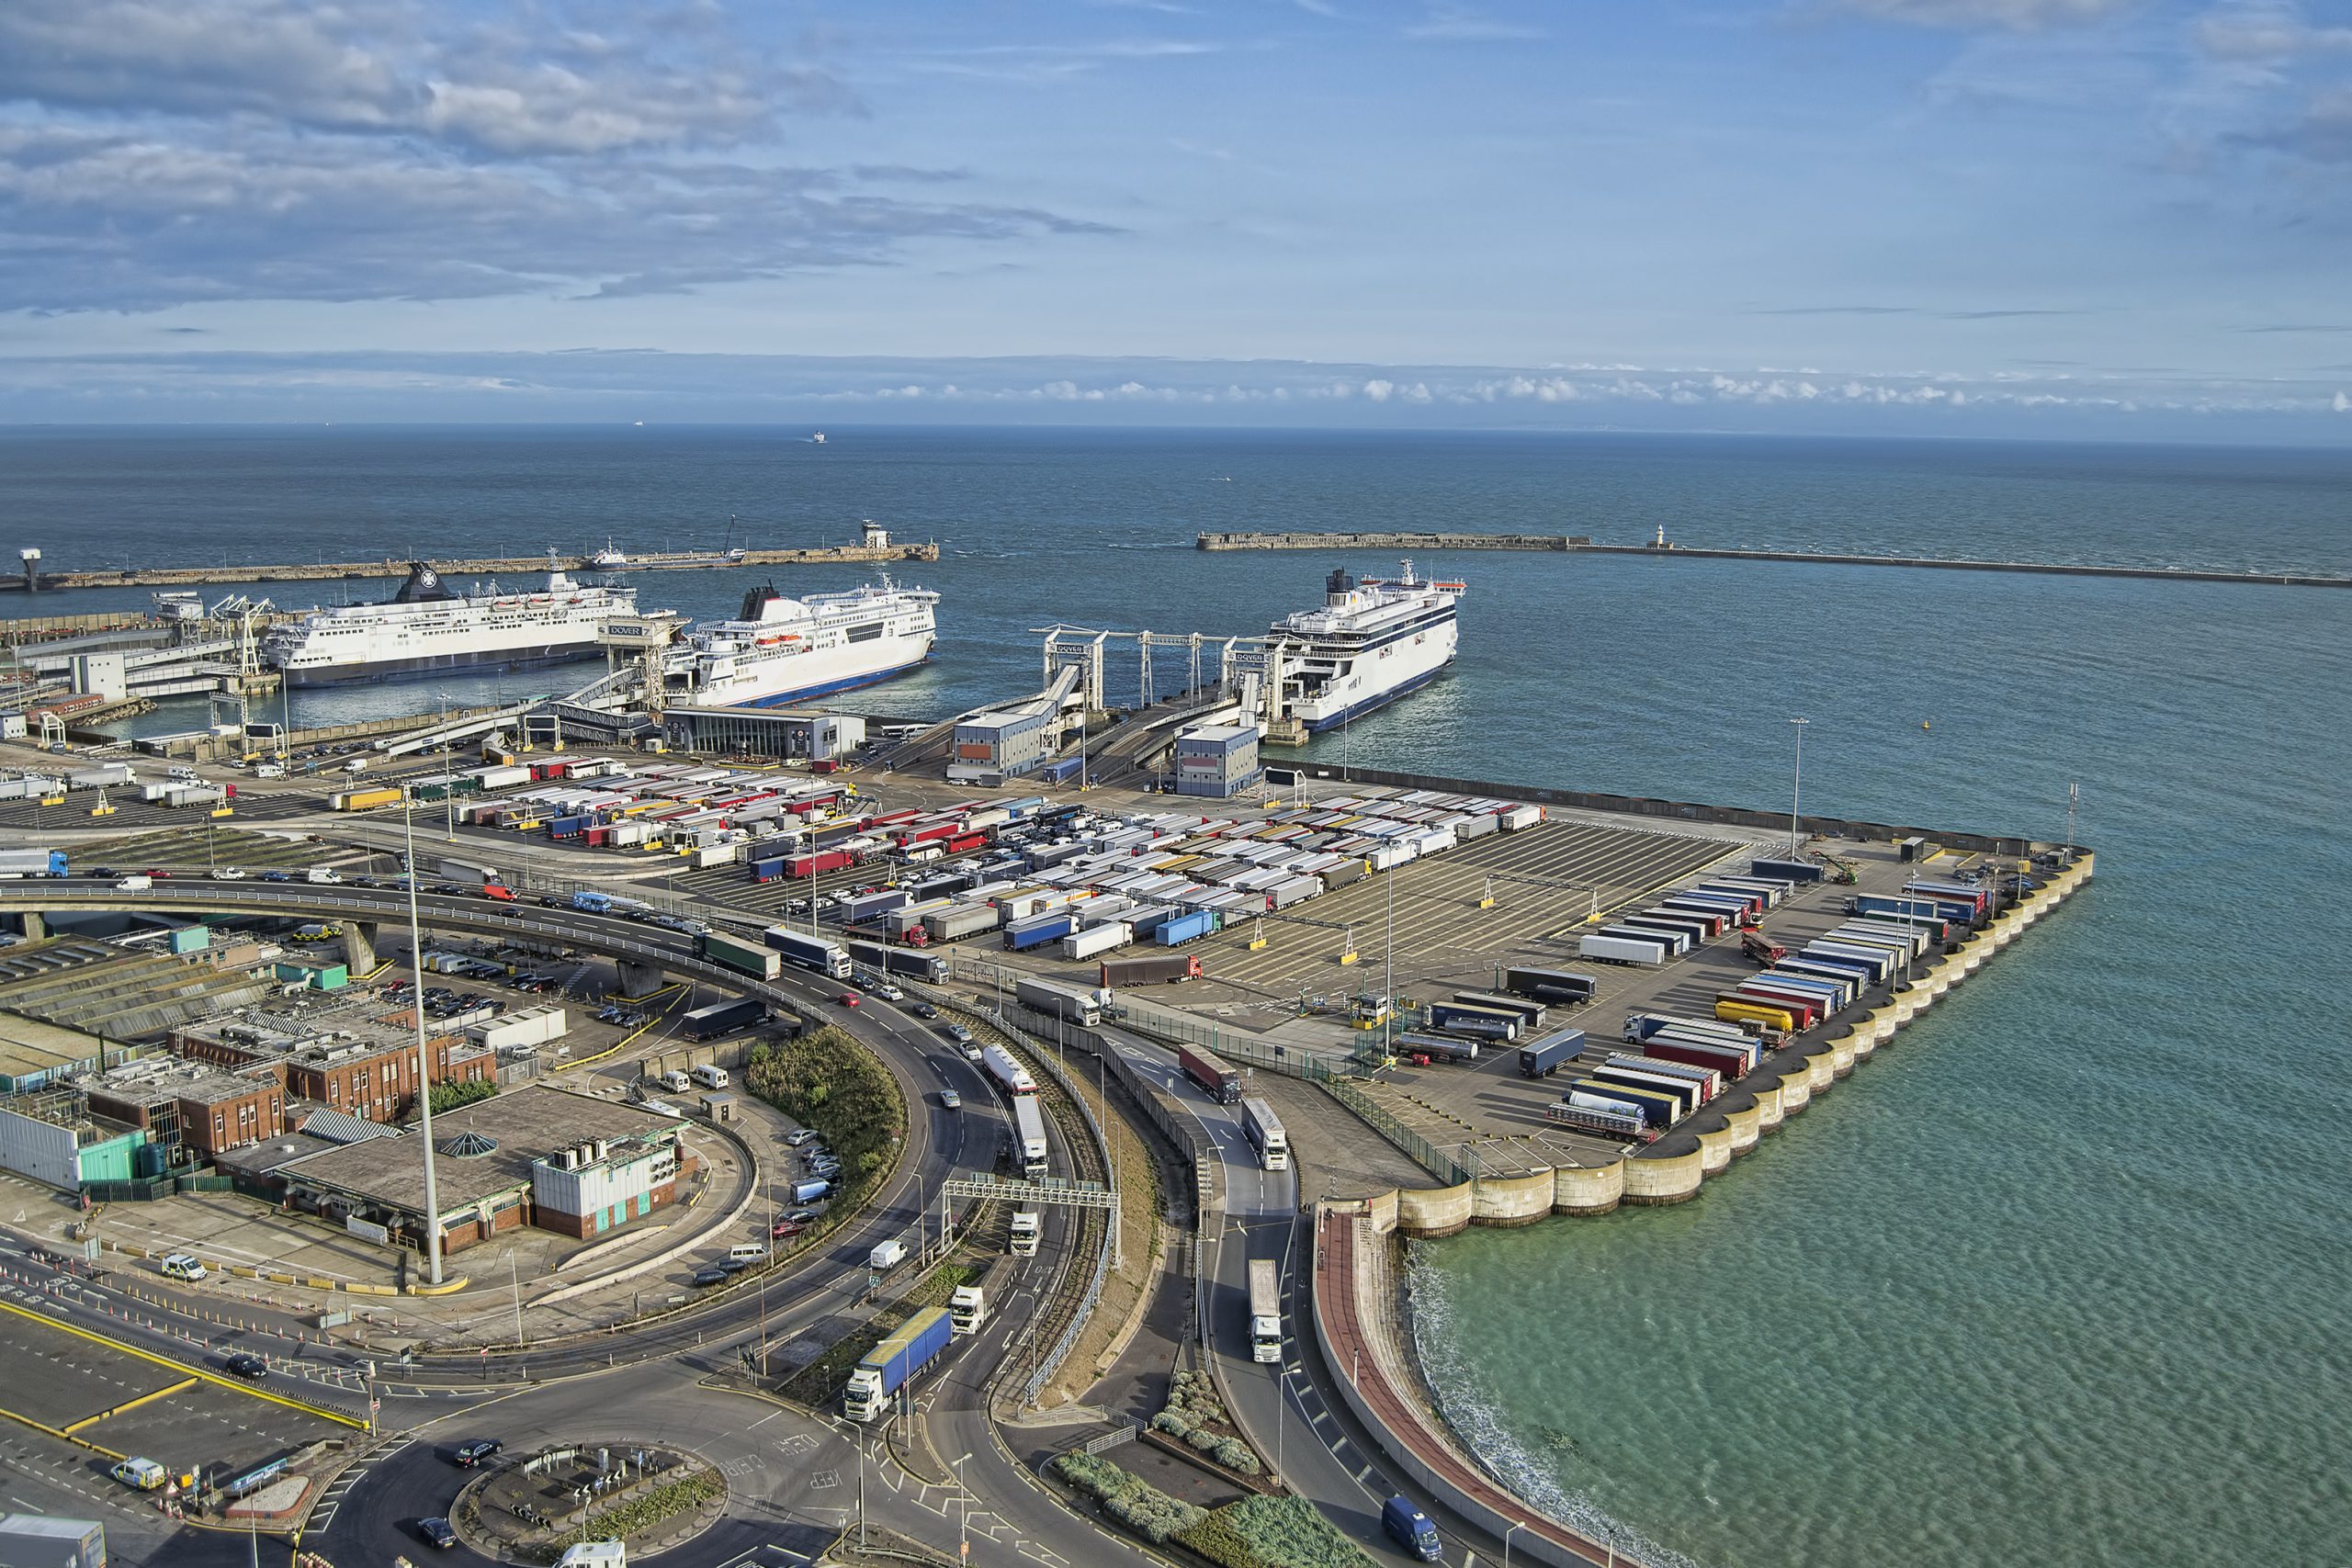 UK ports to switch to shore power for berthed vessels